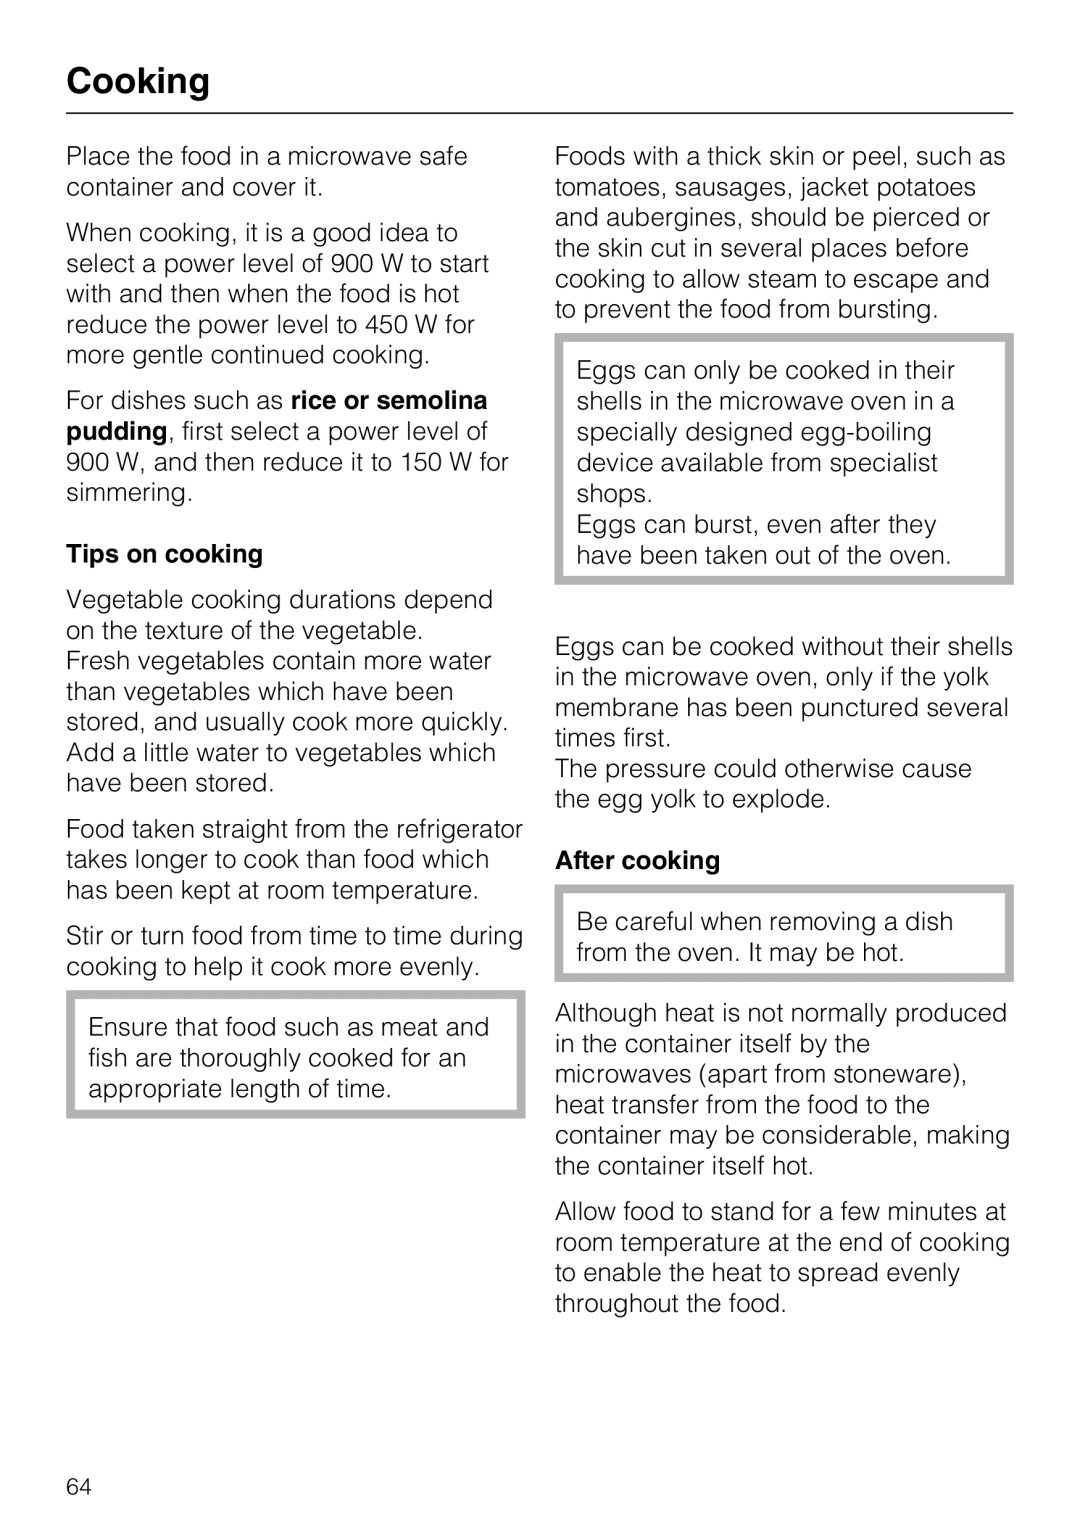 Miele 09 919 100 operating instructions Cooking, Tips on cooking, After cooking 